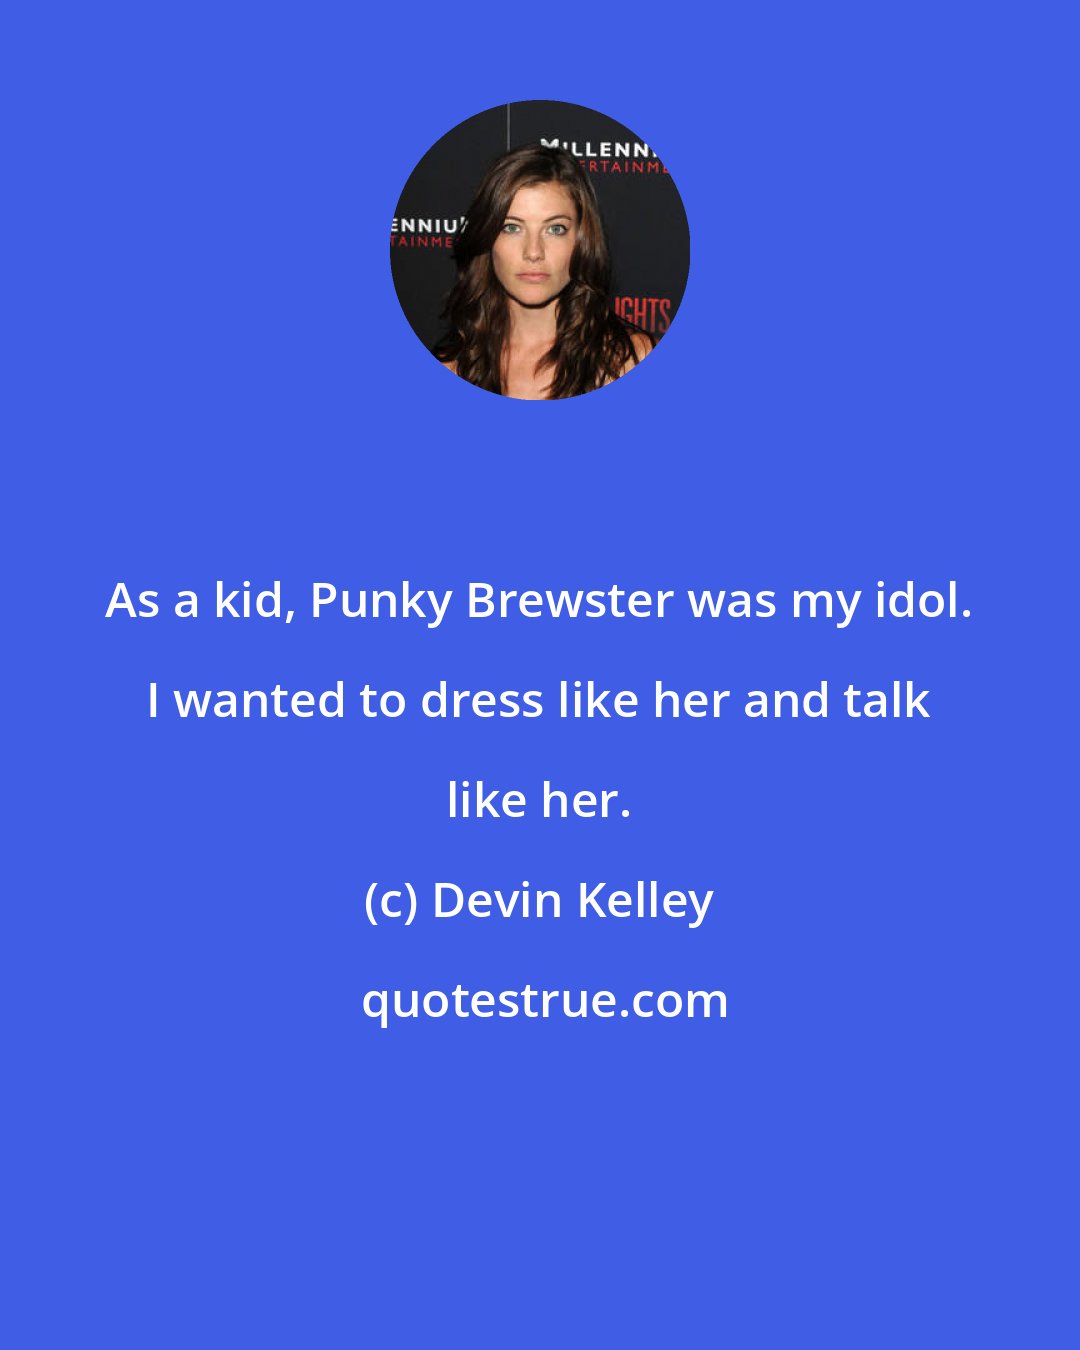 Devin Kelley: As a kid, Punky Brewster was my idol. I wanted to dress like her and talk like her.